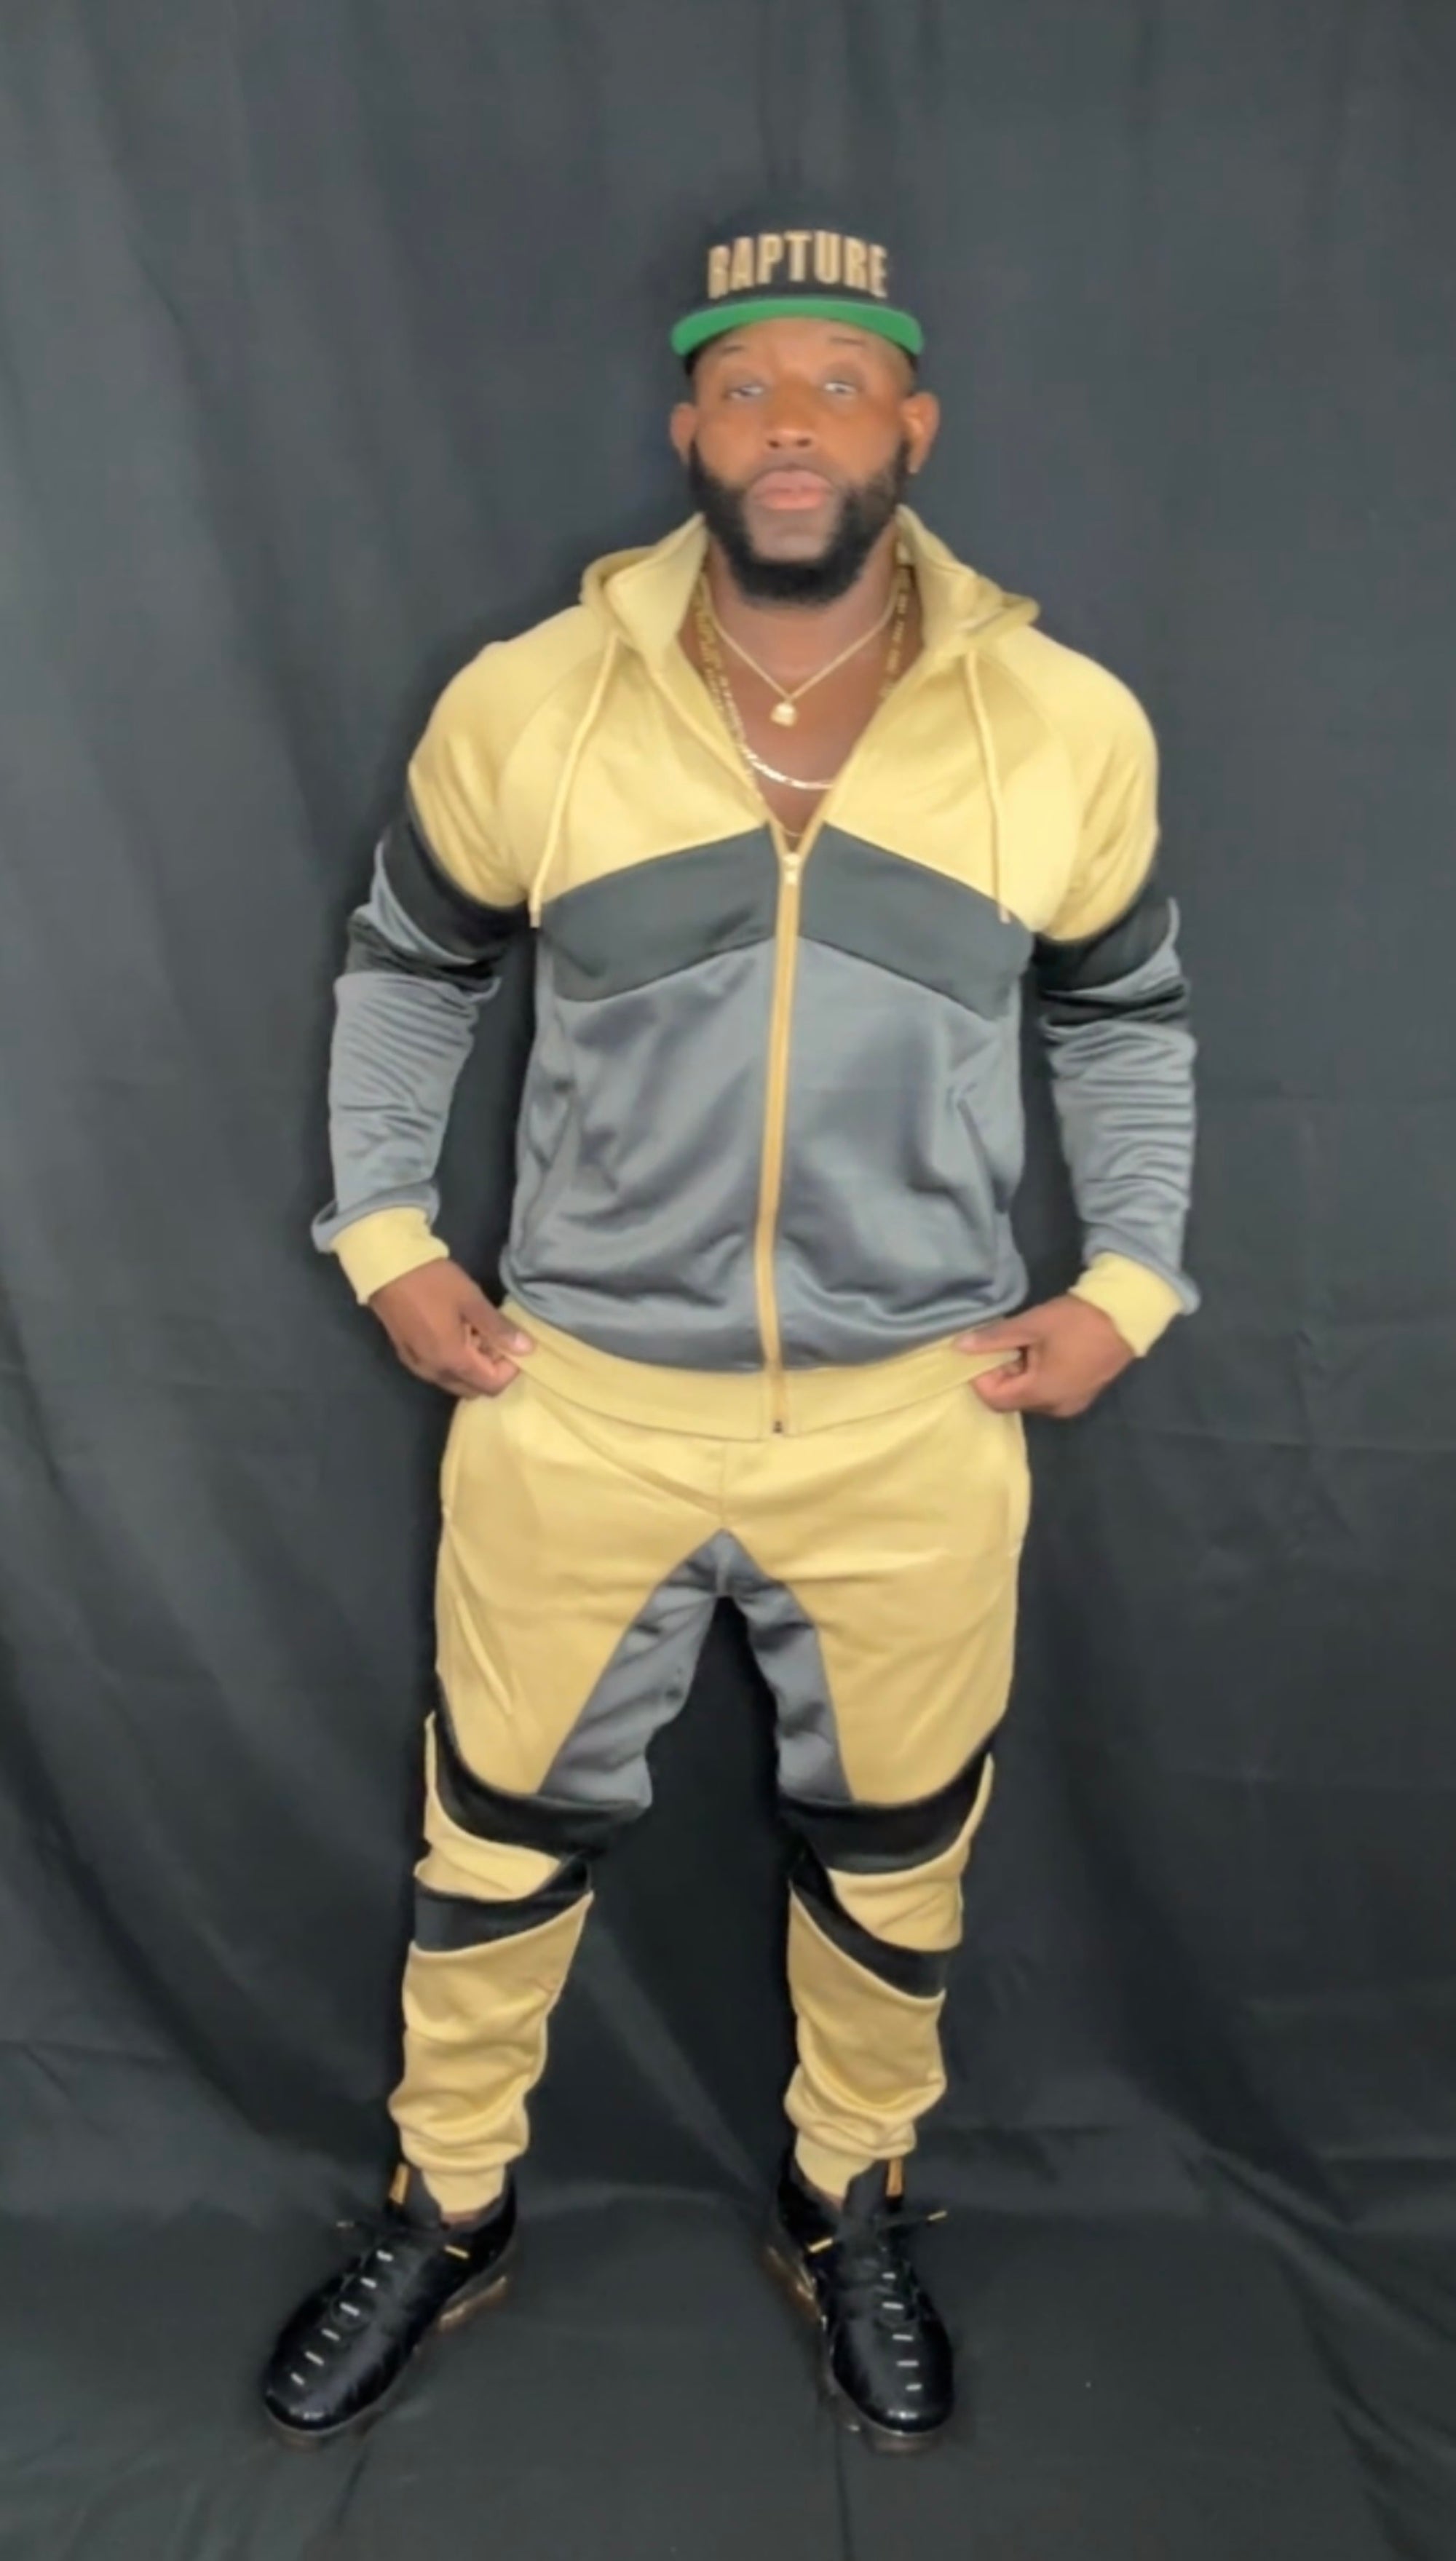 Preach Tracksuit Set Gold/Black/Grey 100% Poly tricot